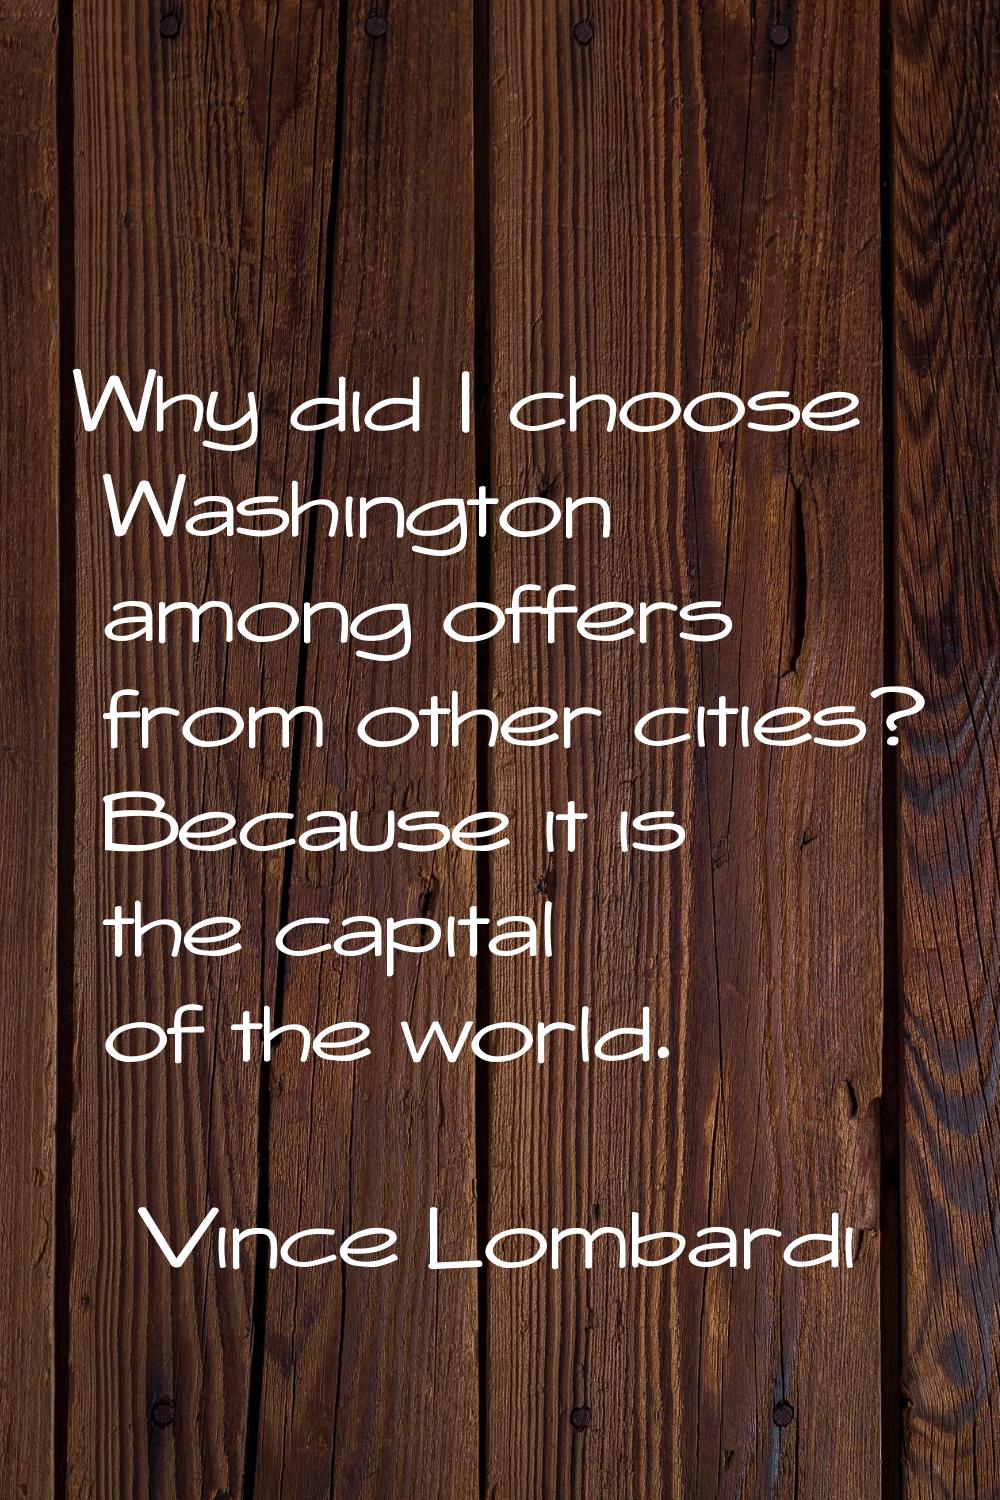 Why did I choose Washington among offers from other cities? Because it is the capital of the world.